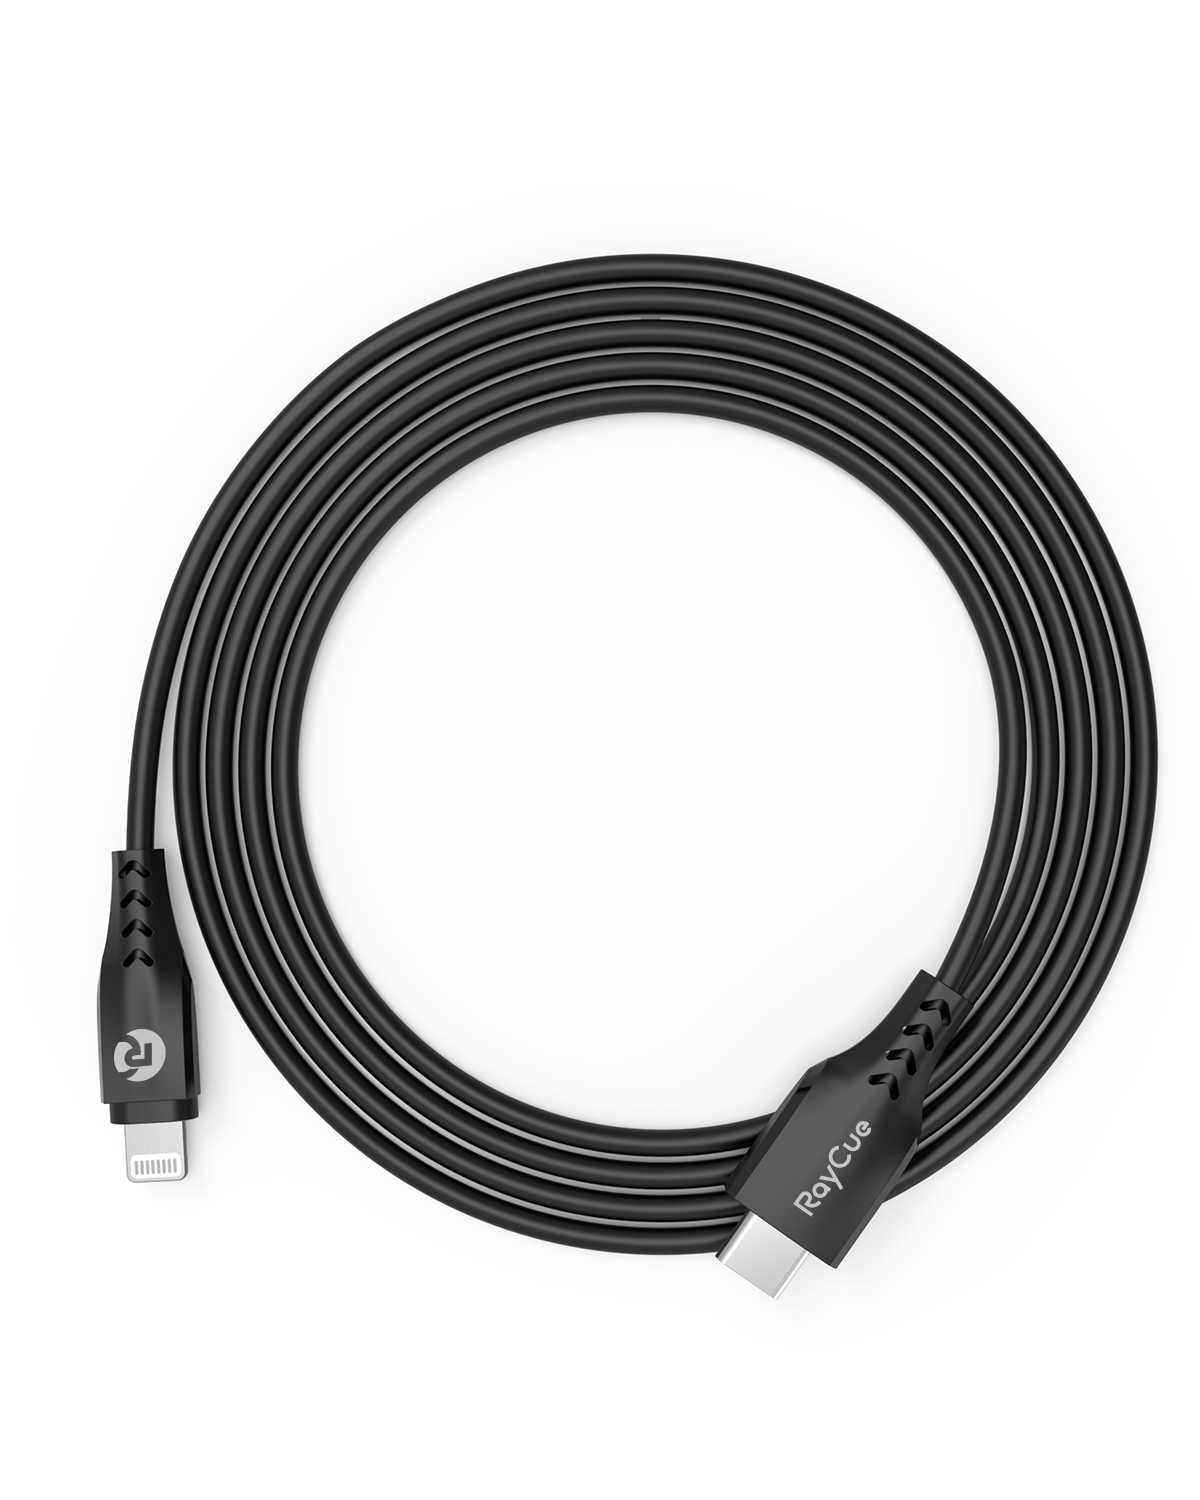 [MFI Certified] RayCue BlitzLink Flexo 1.2M PVC USB-C to Lightning Cable for iPhone iPad